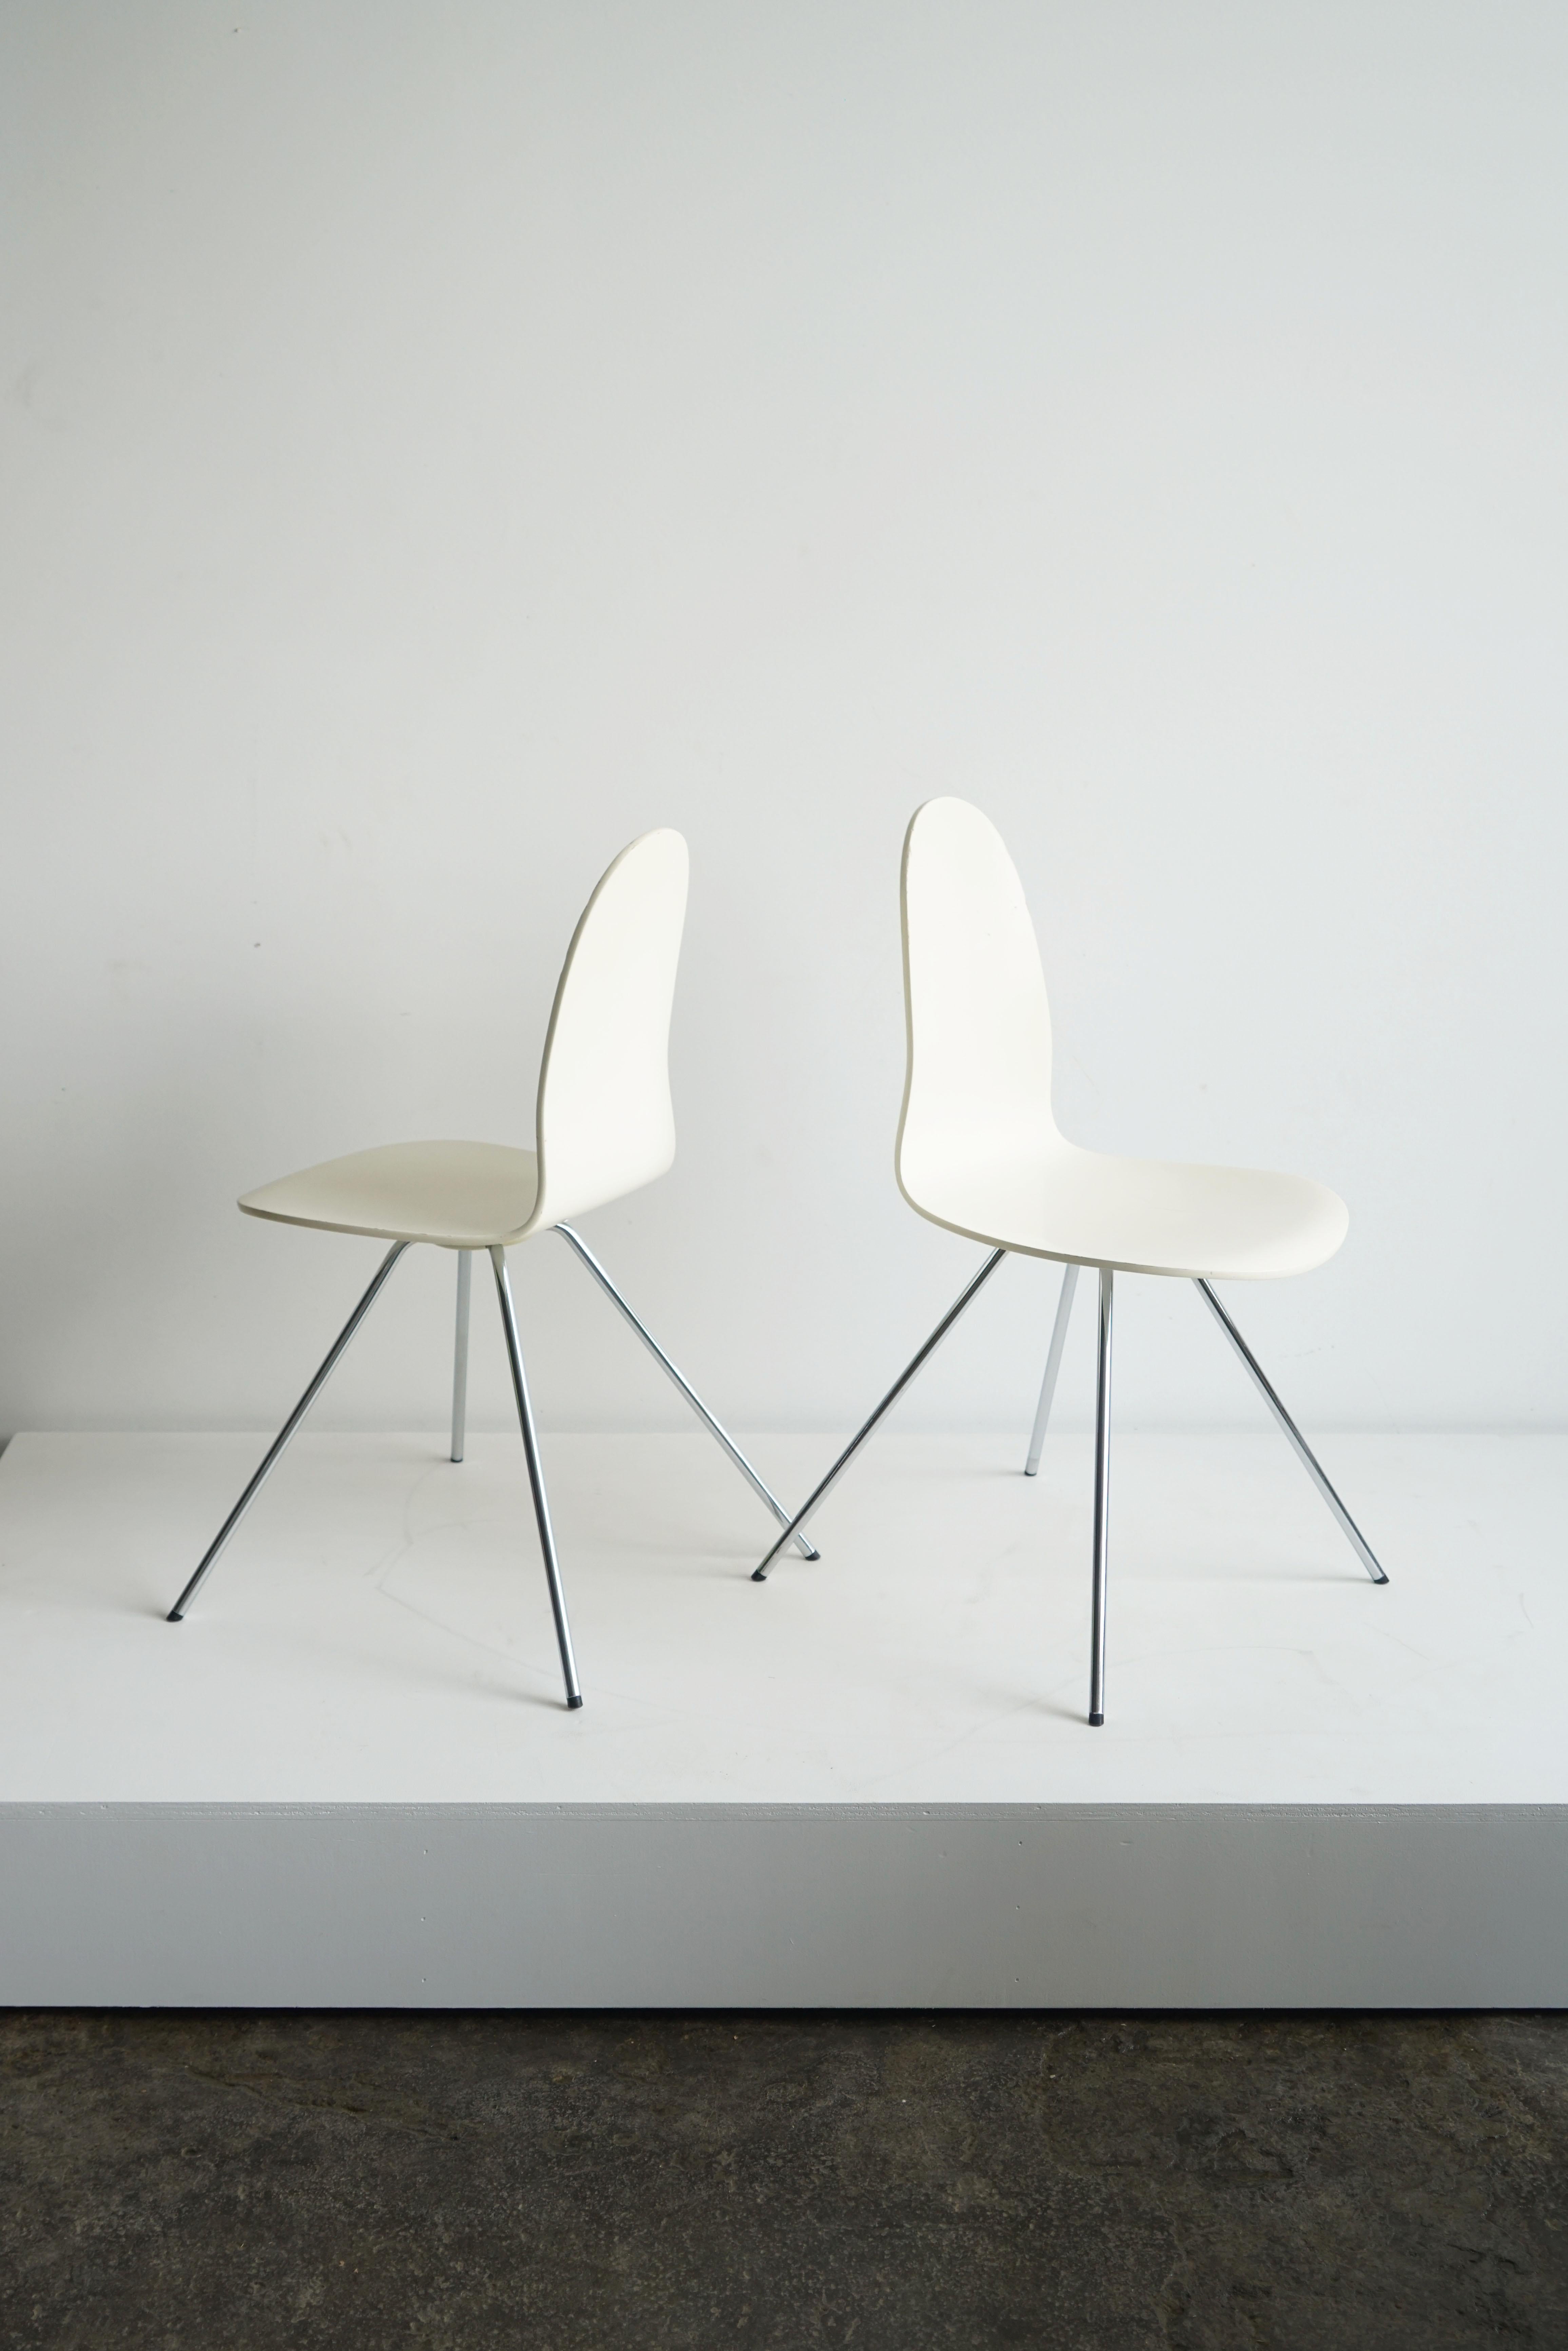 Pair of Arne Jacobsen Tongue chairs model 3106
Fritz Hansen
Denmark, circa 1965

Lacquered plywood seats, chrome-plated legs
31 h × 19 w × 18 d in

Condition:
Overall good vintage condition. Scattered scuffs, scratches, and wear from age and use,